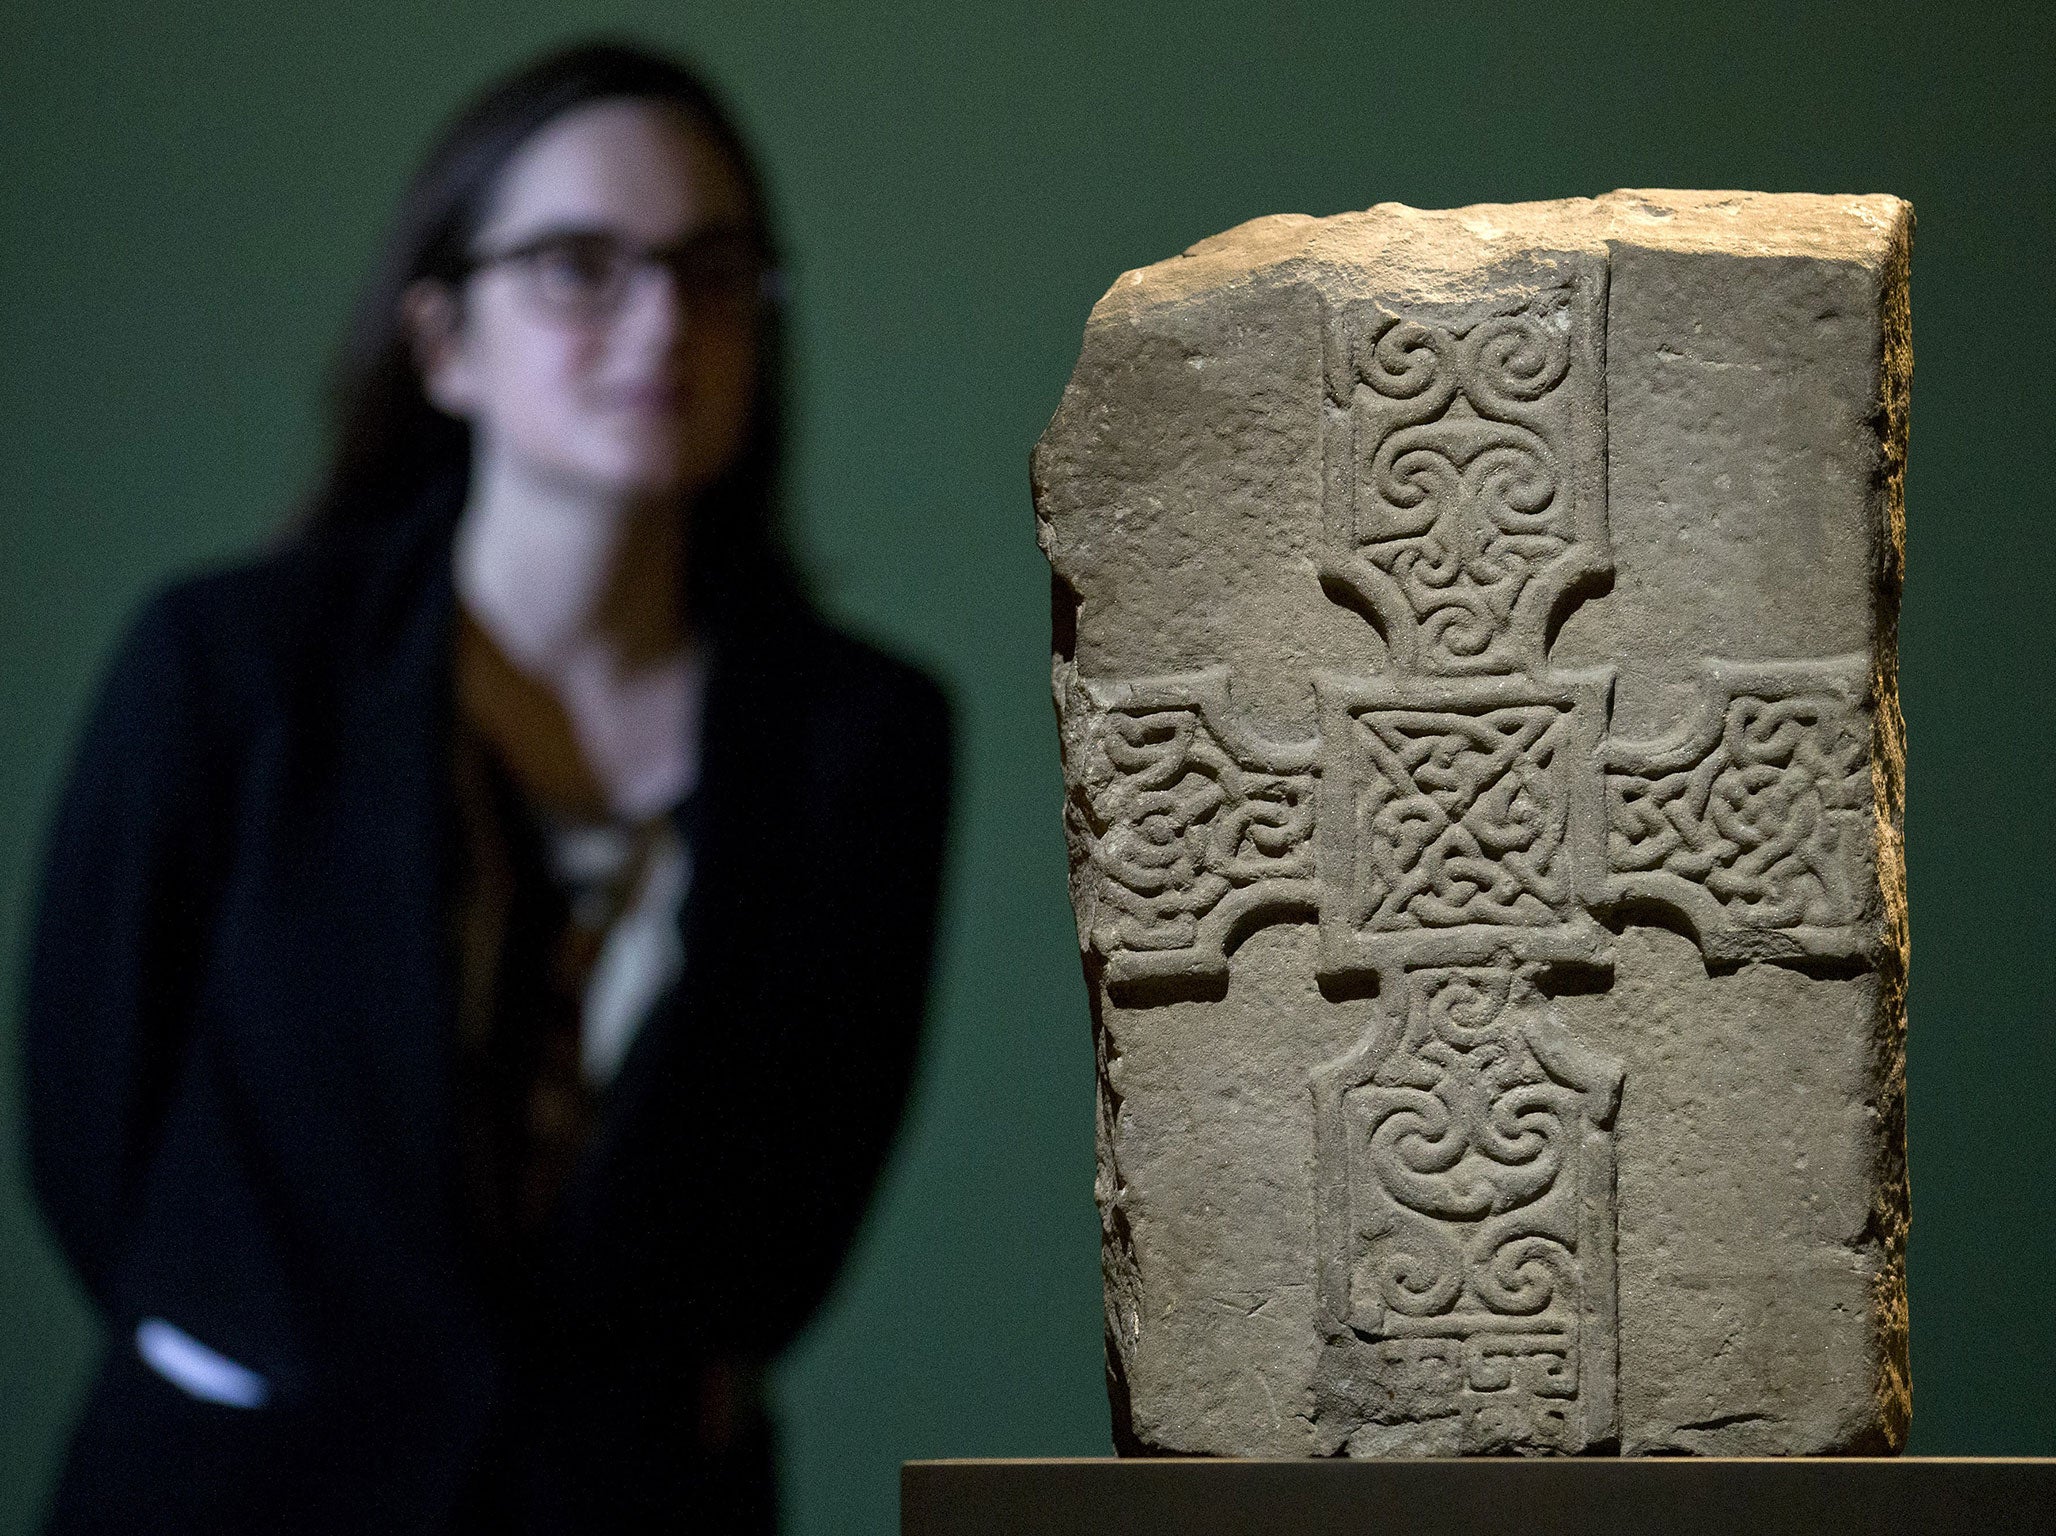 An assistant poses for photographers looking at a sandstone cross-slab, dated to between 800 and 900 AD, during a press preview of 'Celts: art and identity' exhibition at the British Museum in London on September 23, 2015